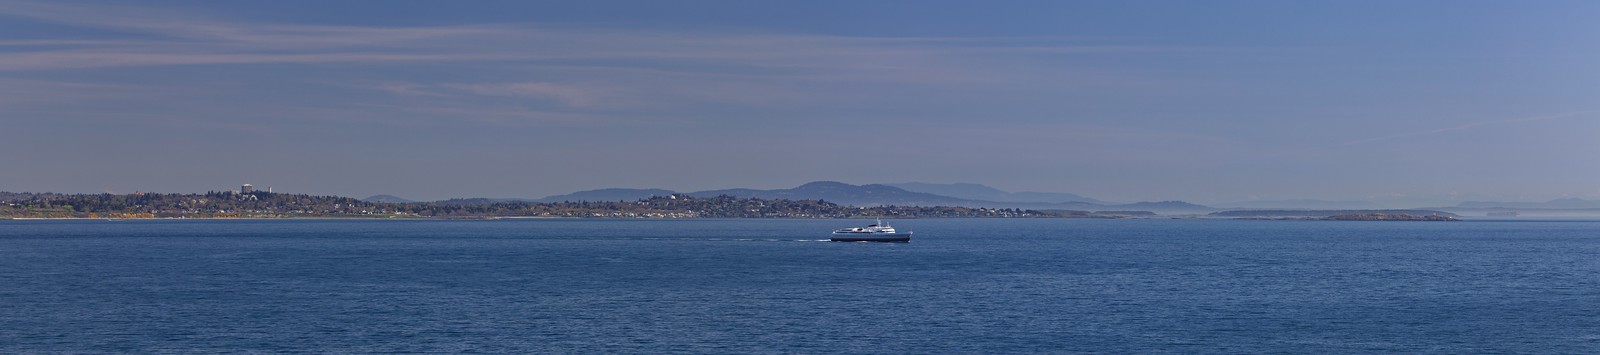 The Coho ferry with Gonzales observatory behind